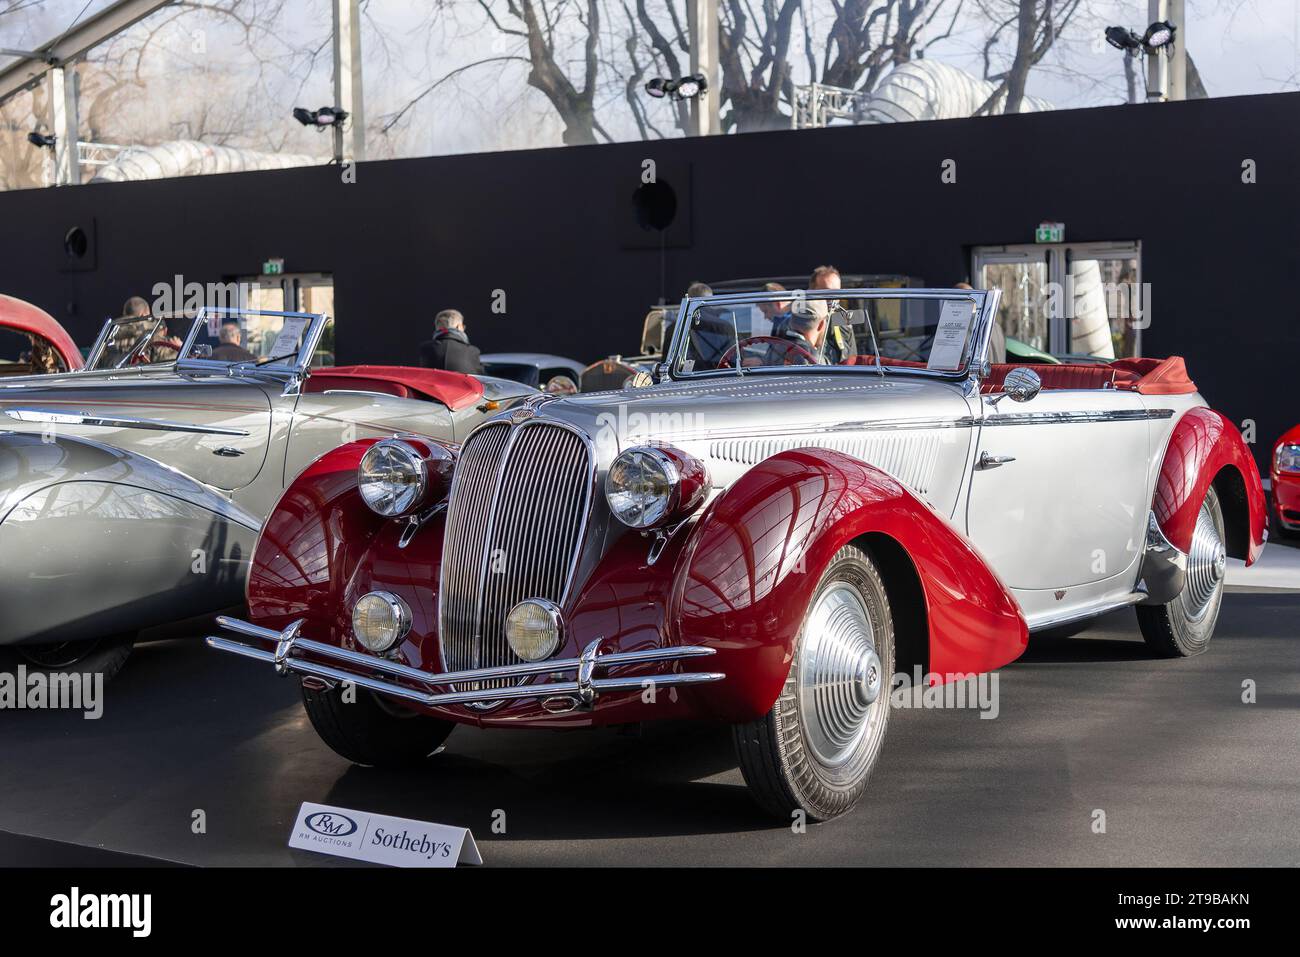 Paris, France - RM Sotheby's Paris 2020. Focus on a red and silver 1946 Delahaye 135 Cabriolet by Figoni et Falaschi. Chassis no. 800308. Stock Photo